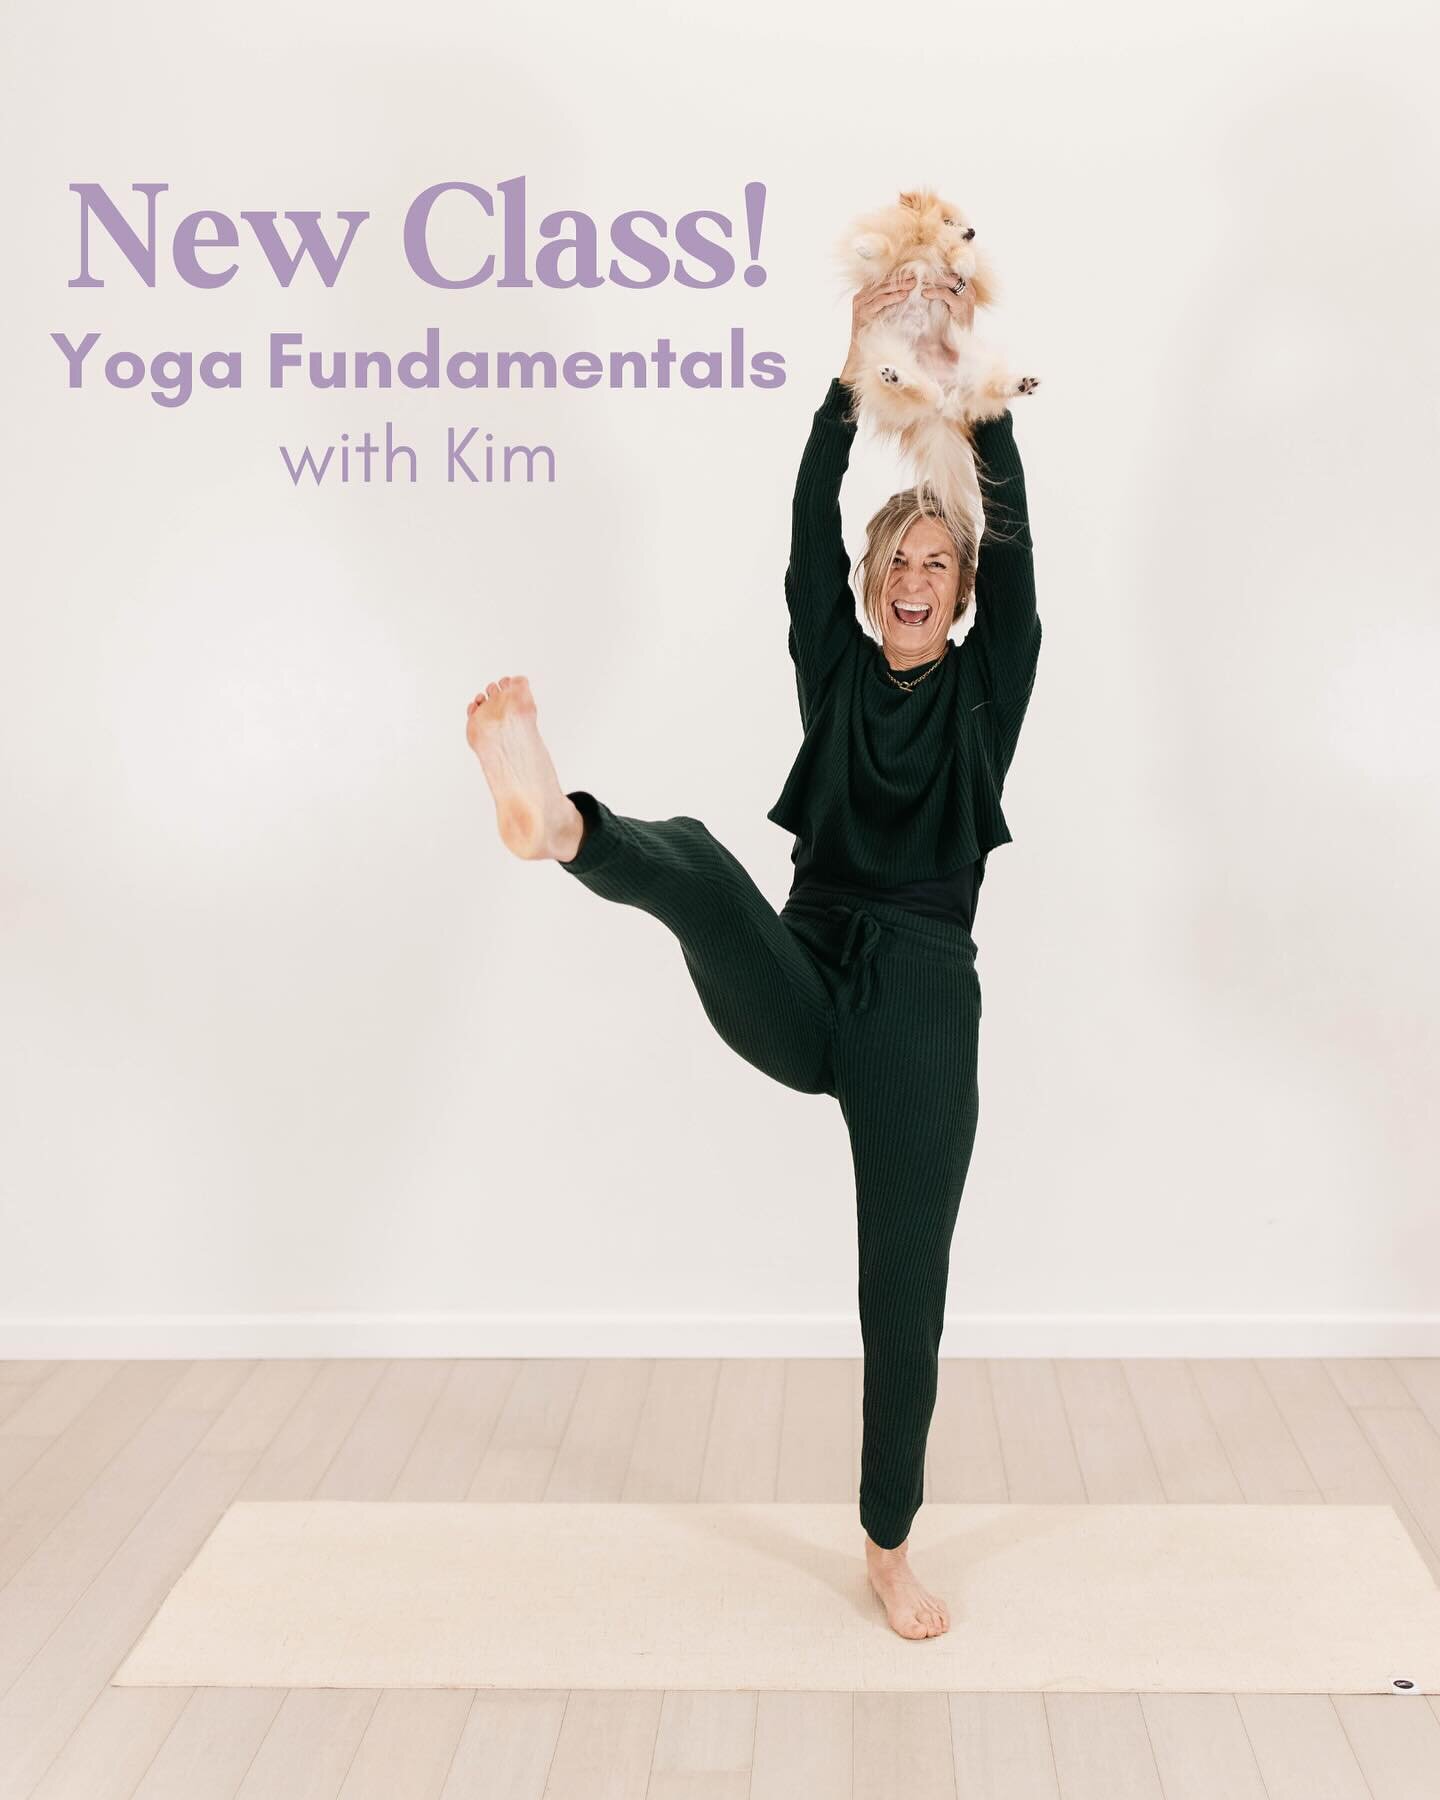 Join @ktlally for her new class Yoga Fundamentals on Tuesdays at 12:00-12:45pm! 

No more excuses! Whether you're ready to embrace a healthier lifestyle or seeking a refreshing tune-up for your existing yoga practice, this 45 minute lunchtime session